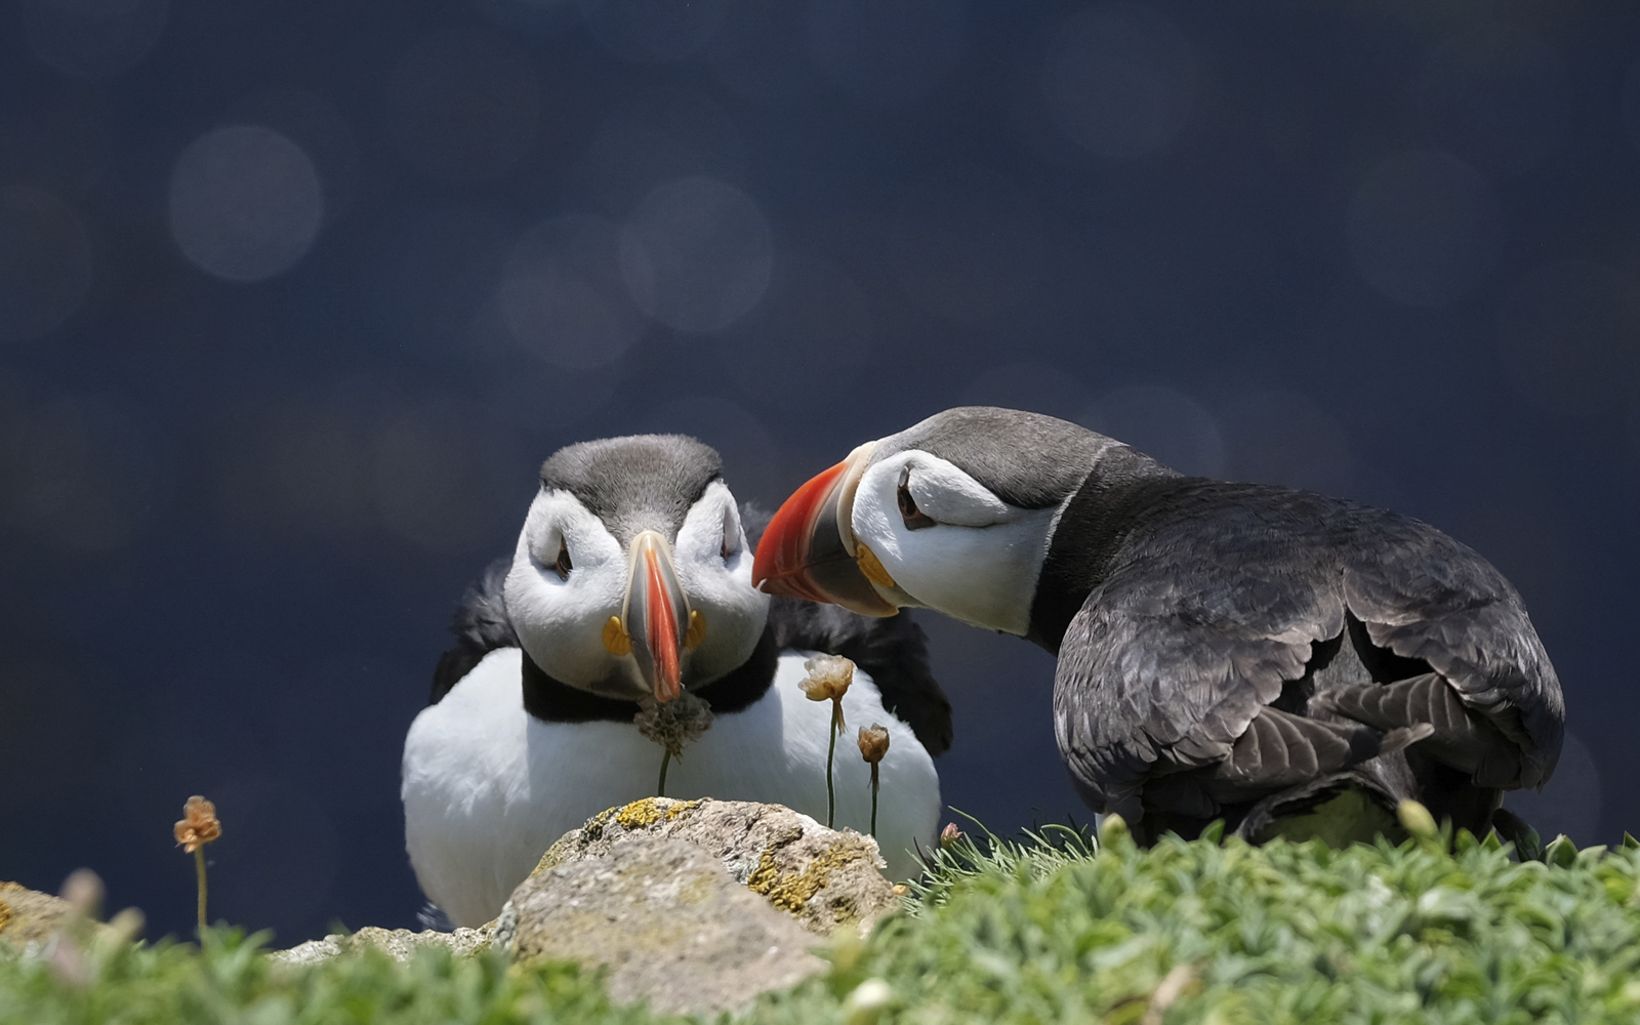 A couple of puffins looking cute on Great Saltee Island off the coast of Wexford, Ireland; taken on the 4th July this year.